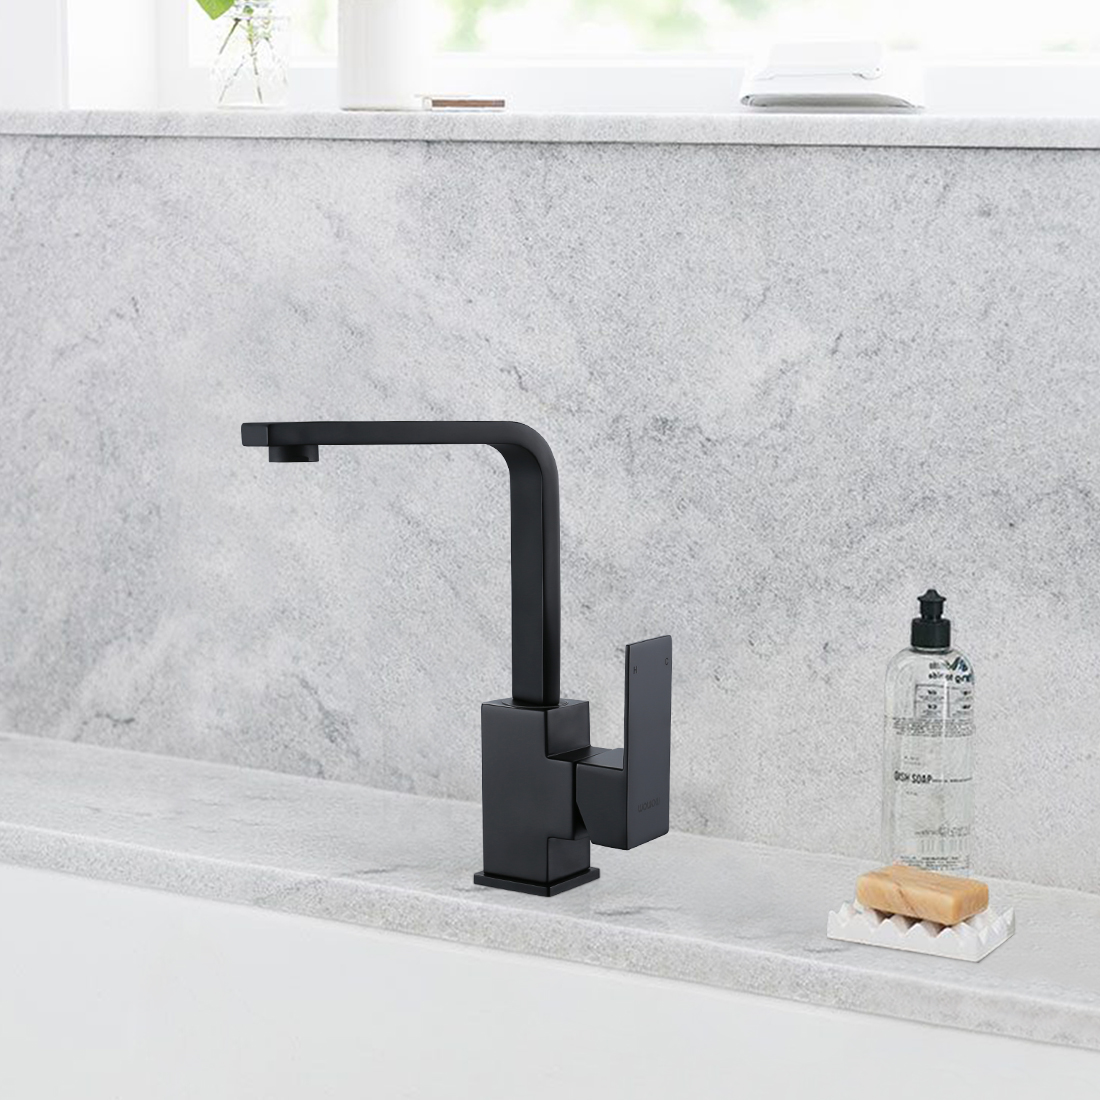 More than 95% of the faucet handles use zinc alloy materials